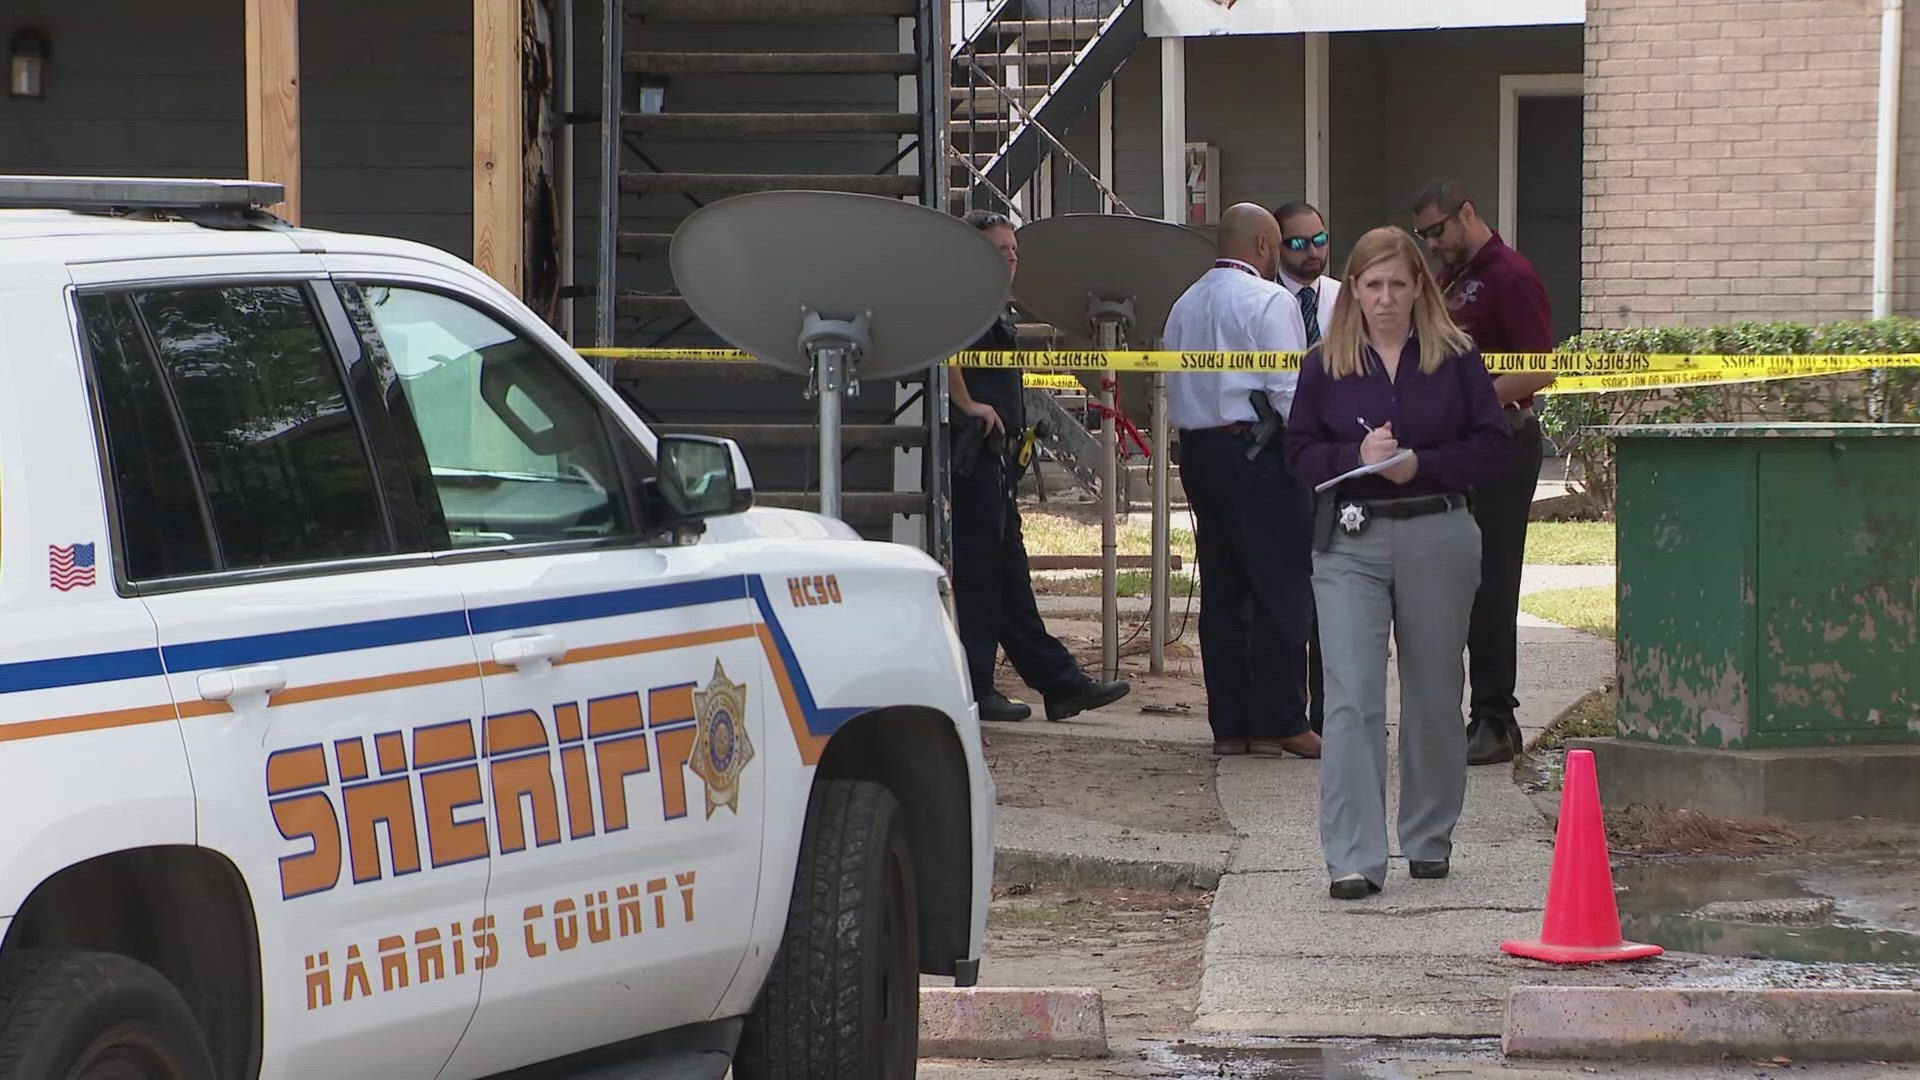 A detective with the Harris County Sheriff's Office confirmed to KHOU 11 that the fetus was found Monday morning.